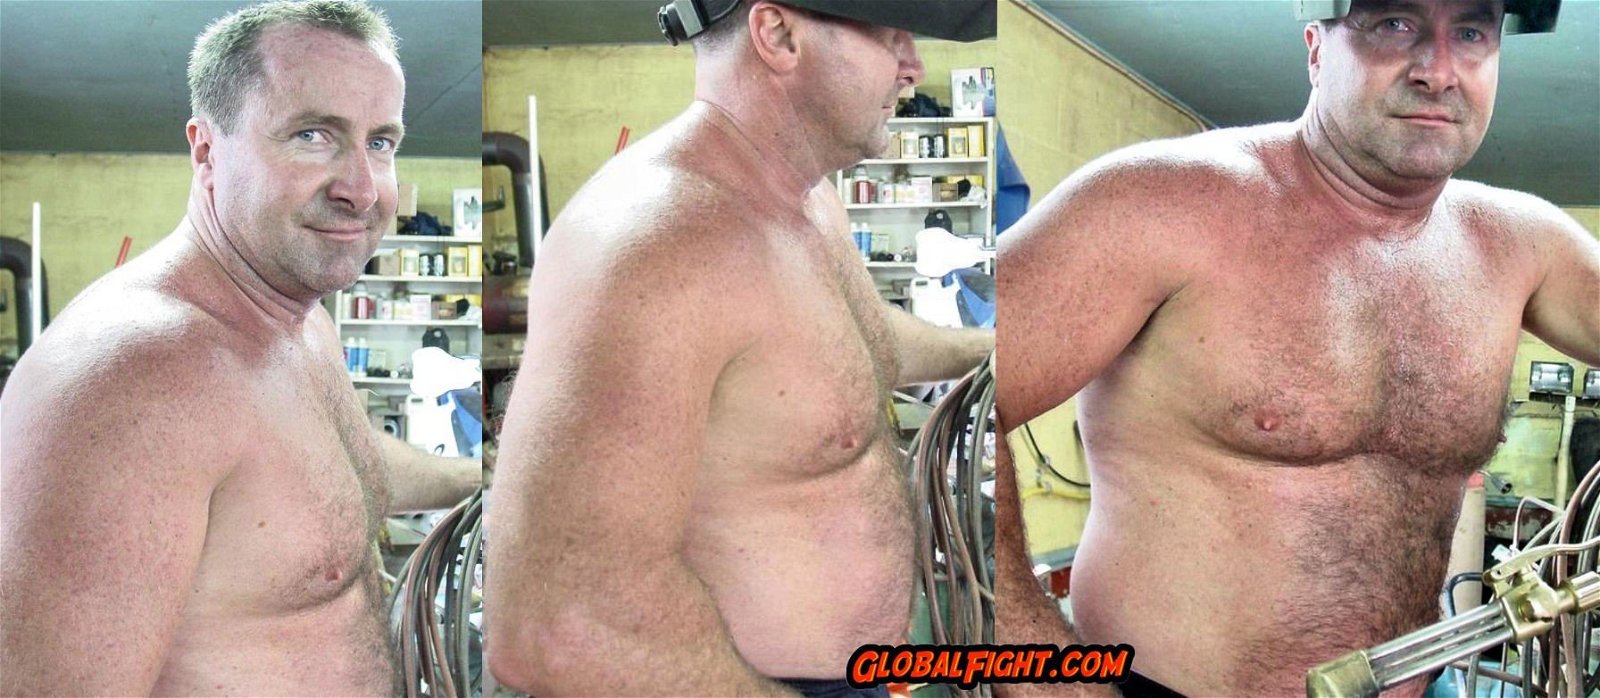 Watch the Photo by Hairy Musclebears with the username @hairymusclebears, posted on February 3, 2023. The post is about the topic Carolina Jim Musclebear. and the text says 'Working Shirtless VIEW THE NUDE VIDEO on his page at GLOBALFIGHT com  --  #hotdaddy #hairybear #hairybelly #hairydaddy #gaydaddybear #gaydaddies #hairymuscle #dilf #dilfs #strongdad #bigdaddy #hairypecs #gaybear #gaybears #gay #gayboy #gayman #gaymen'